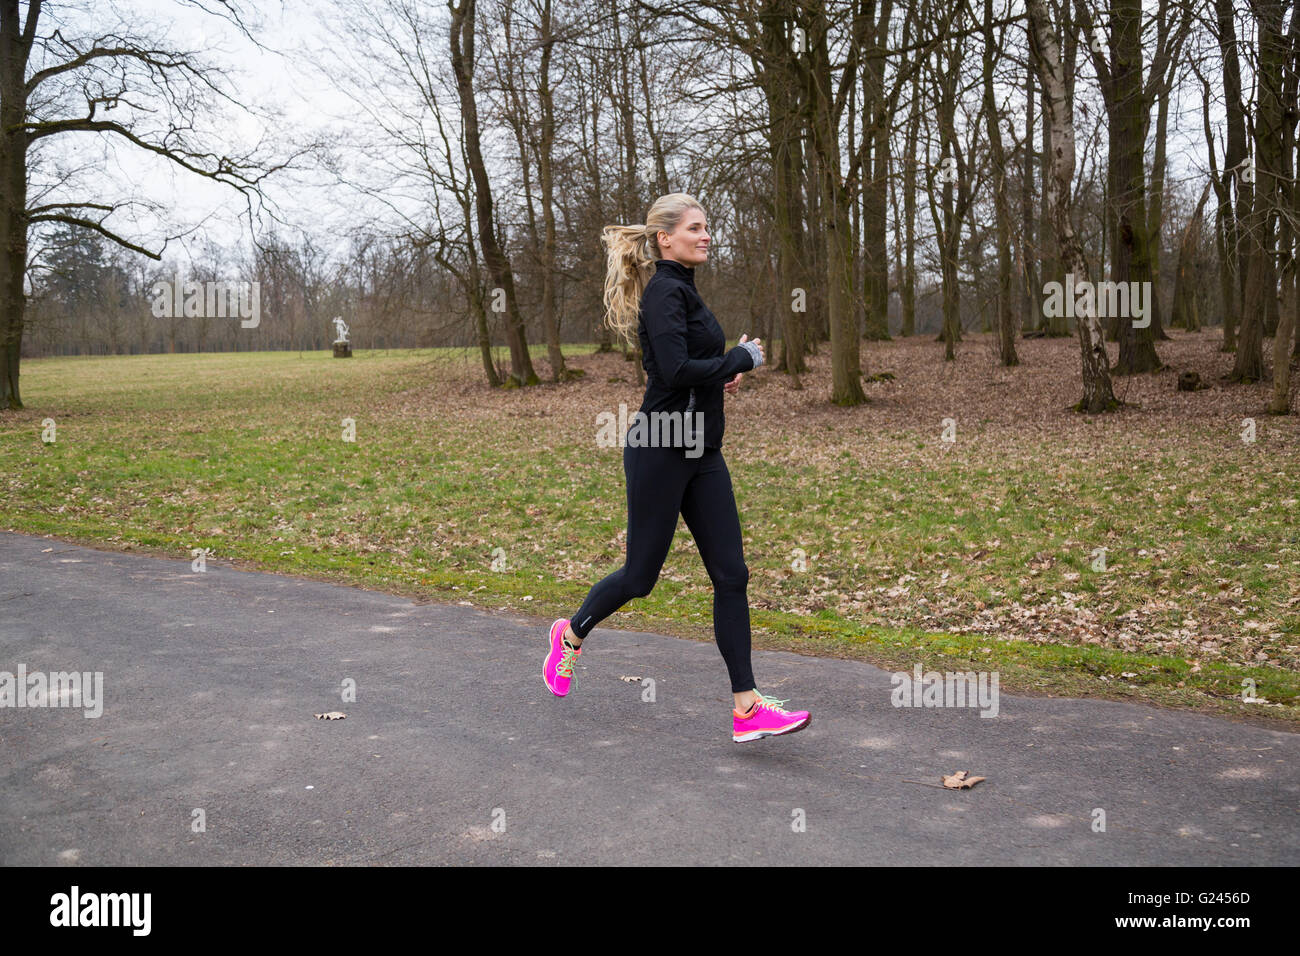 Athletic middle aged female jogging in a park. Stock Photo